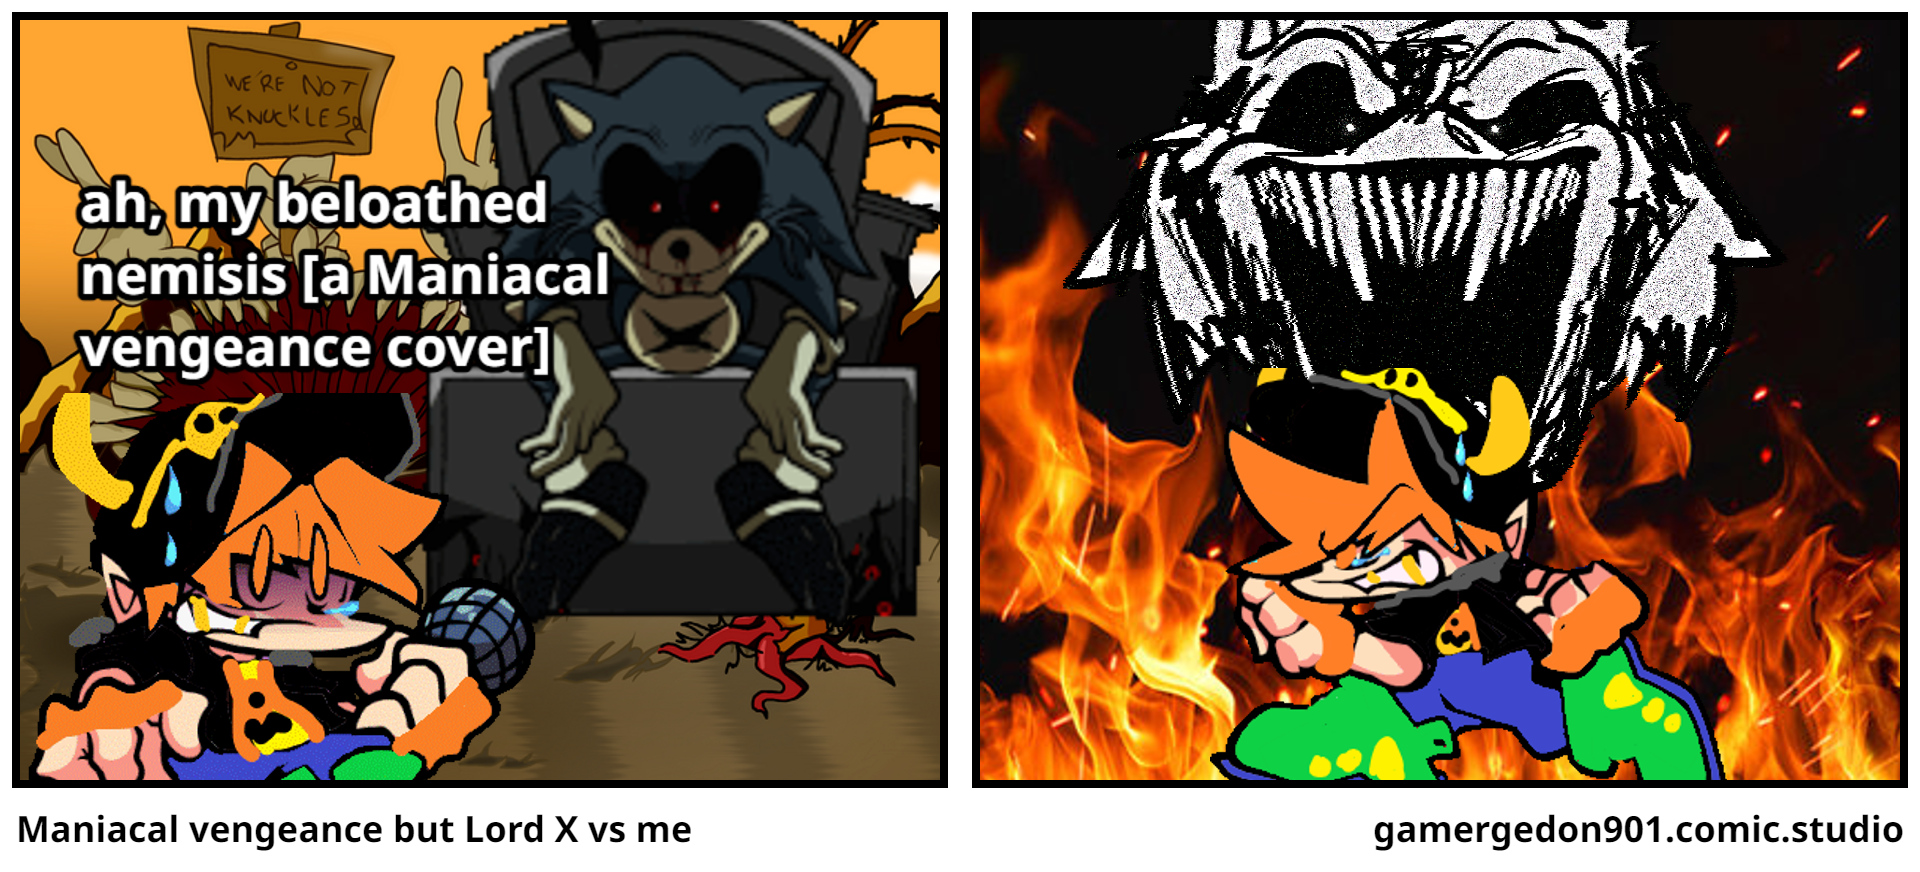 Maniacal vengeance but Lord X vs me